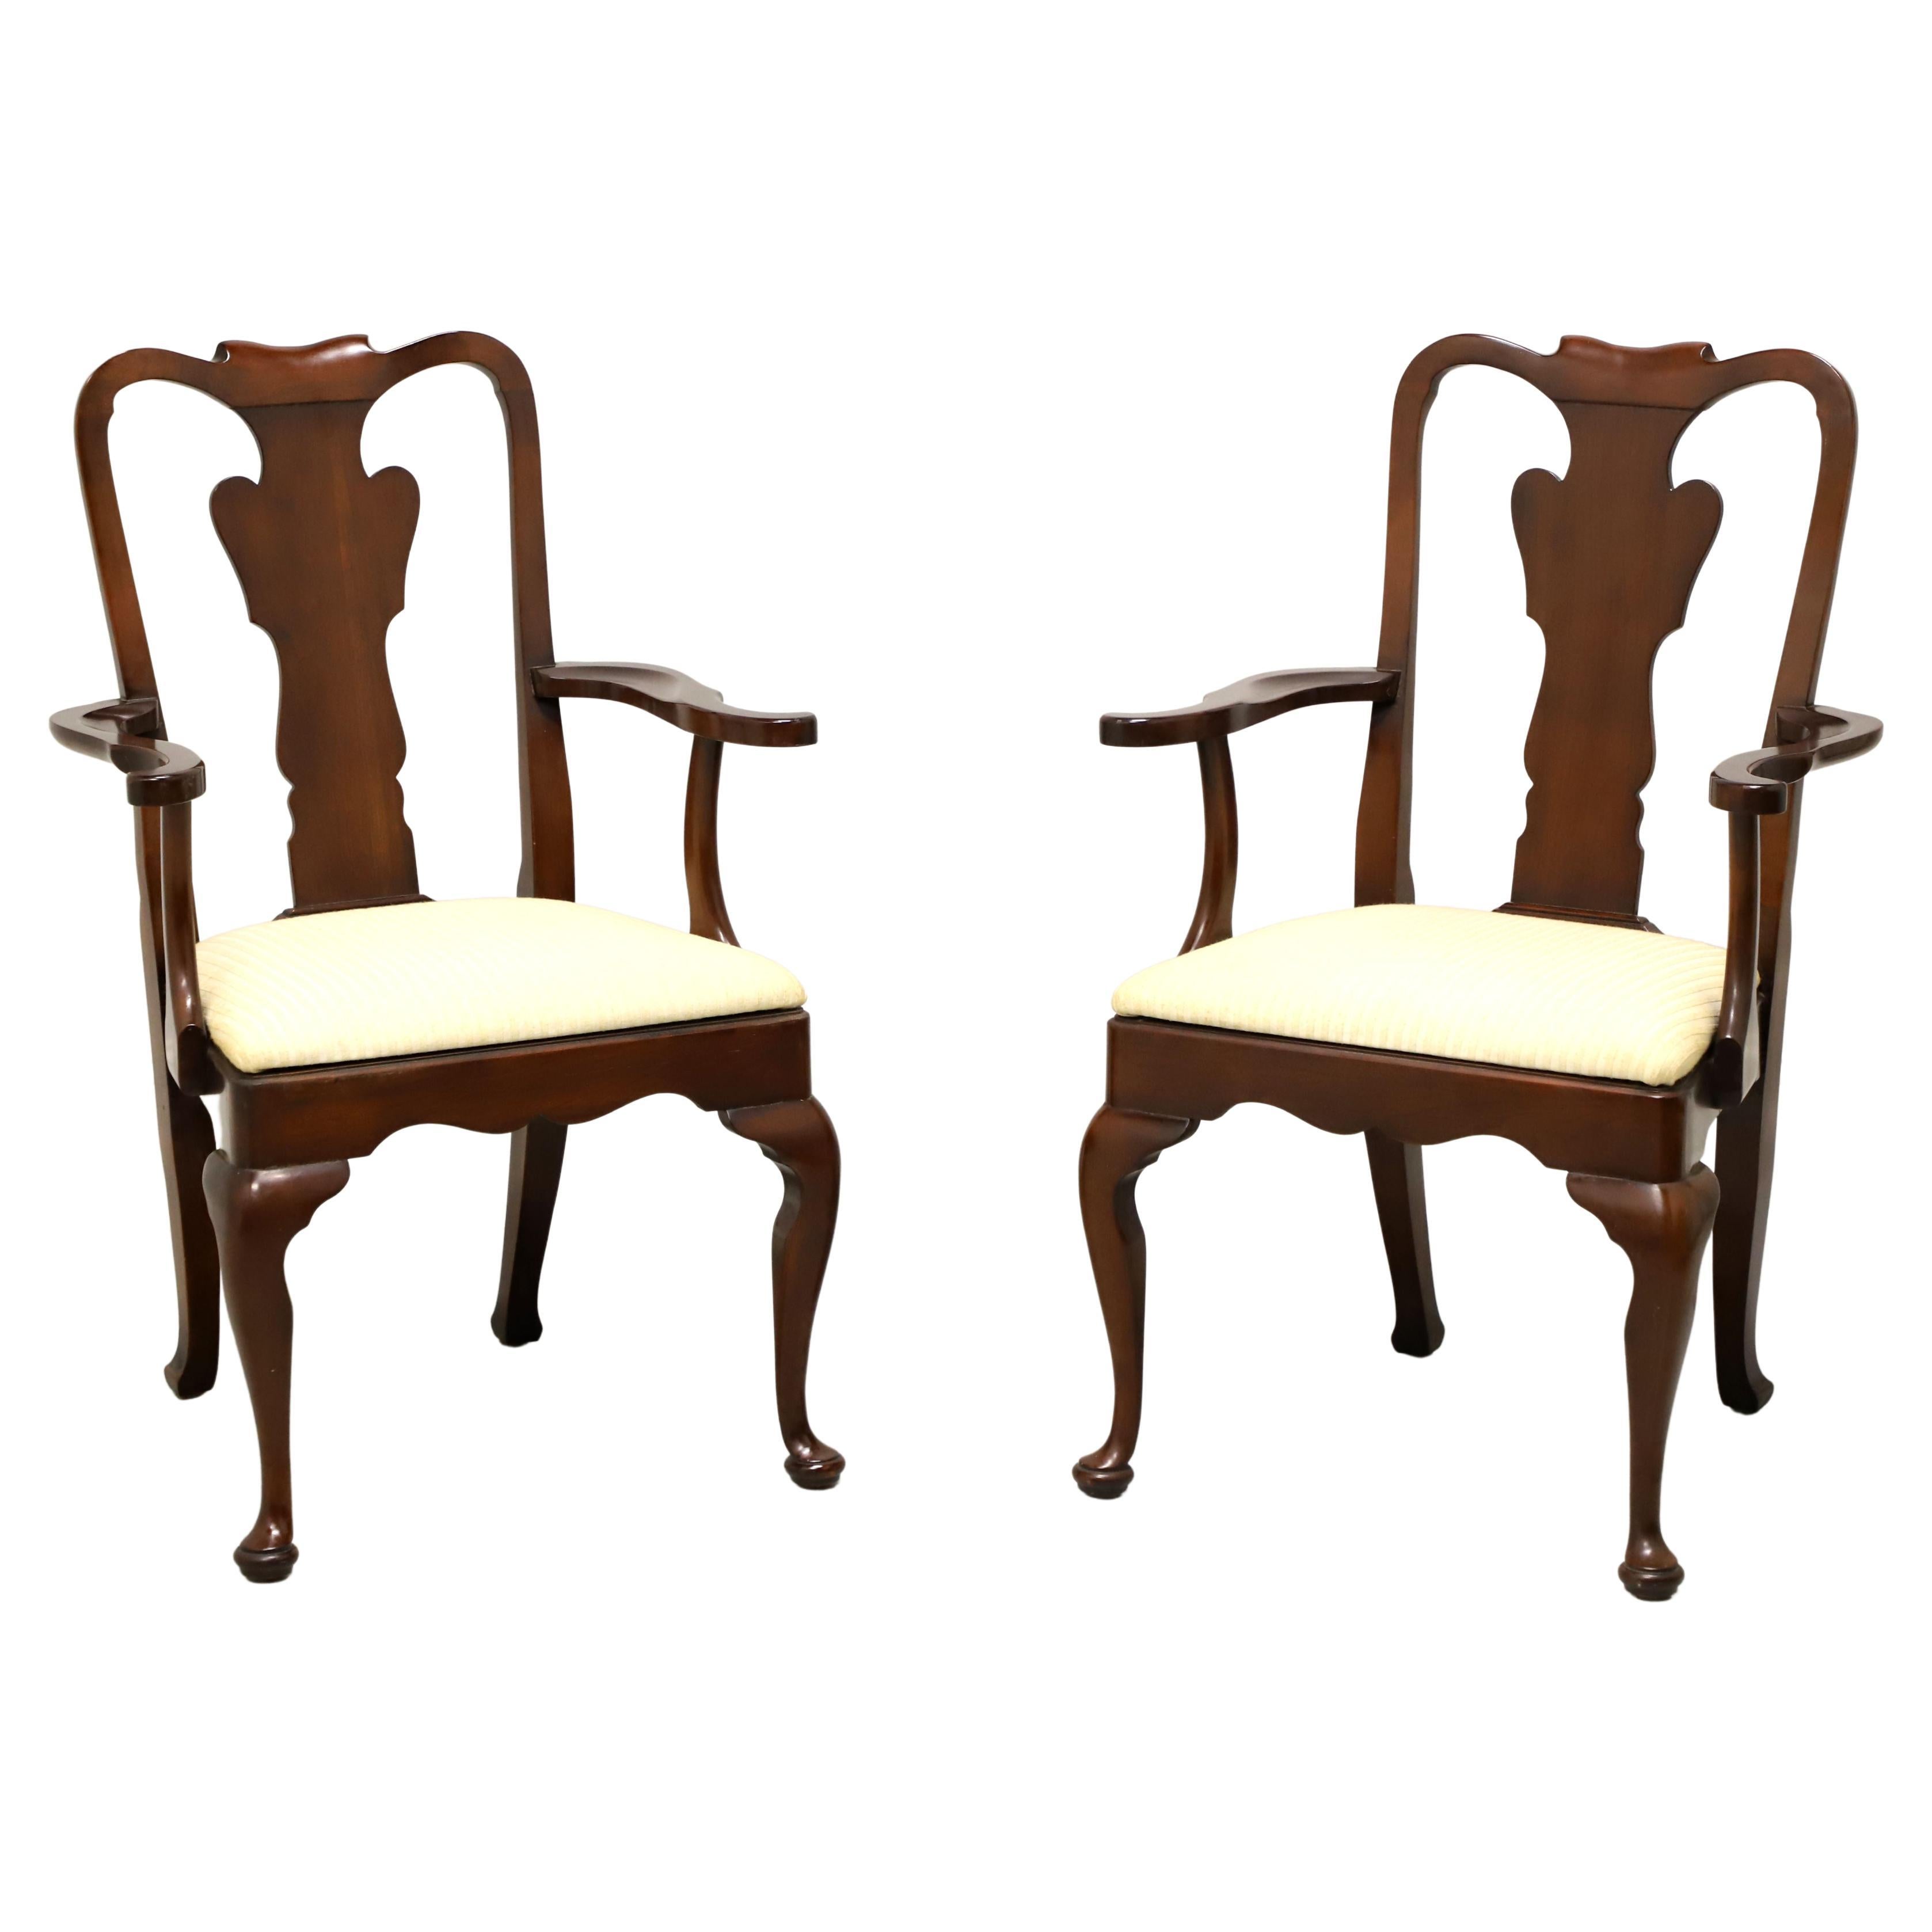 STATTON Old Towne Cherry Queen Anne Dining Armchairs - Pair